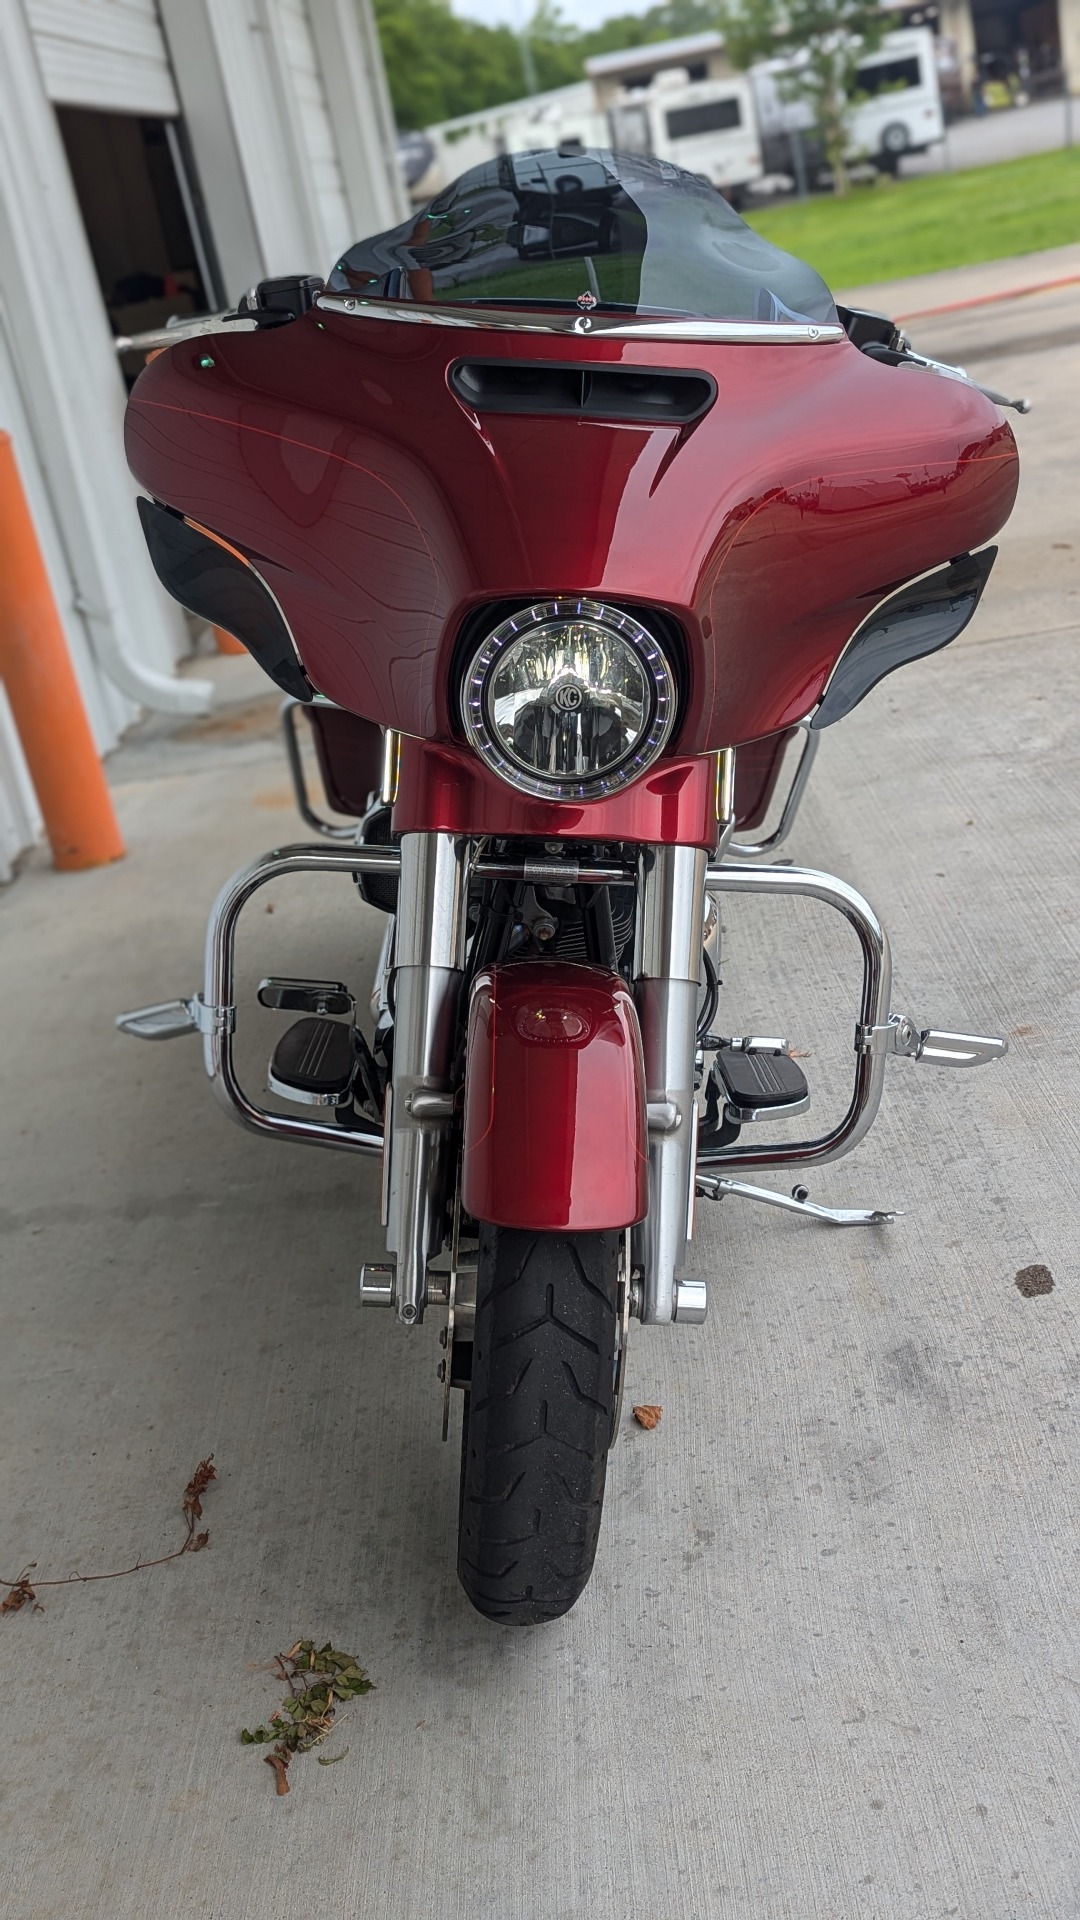 2016 harley davidson street glide special velocity red for sale in houston - Photo 9